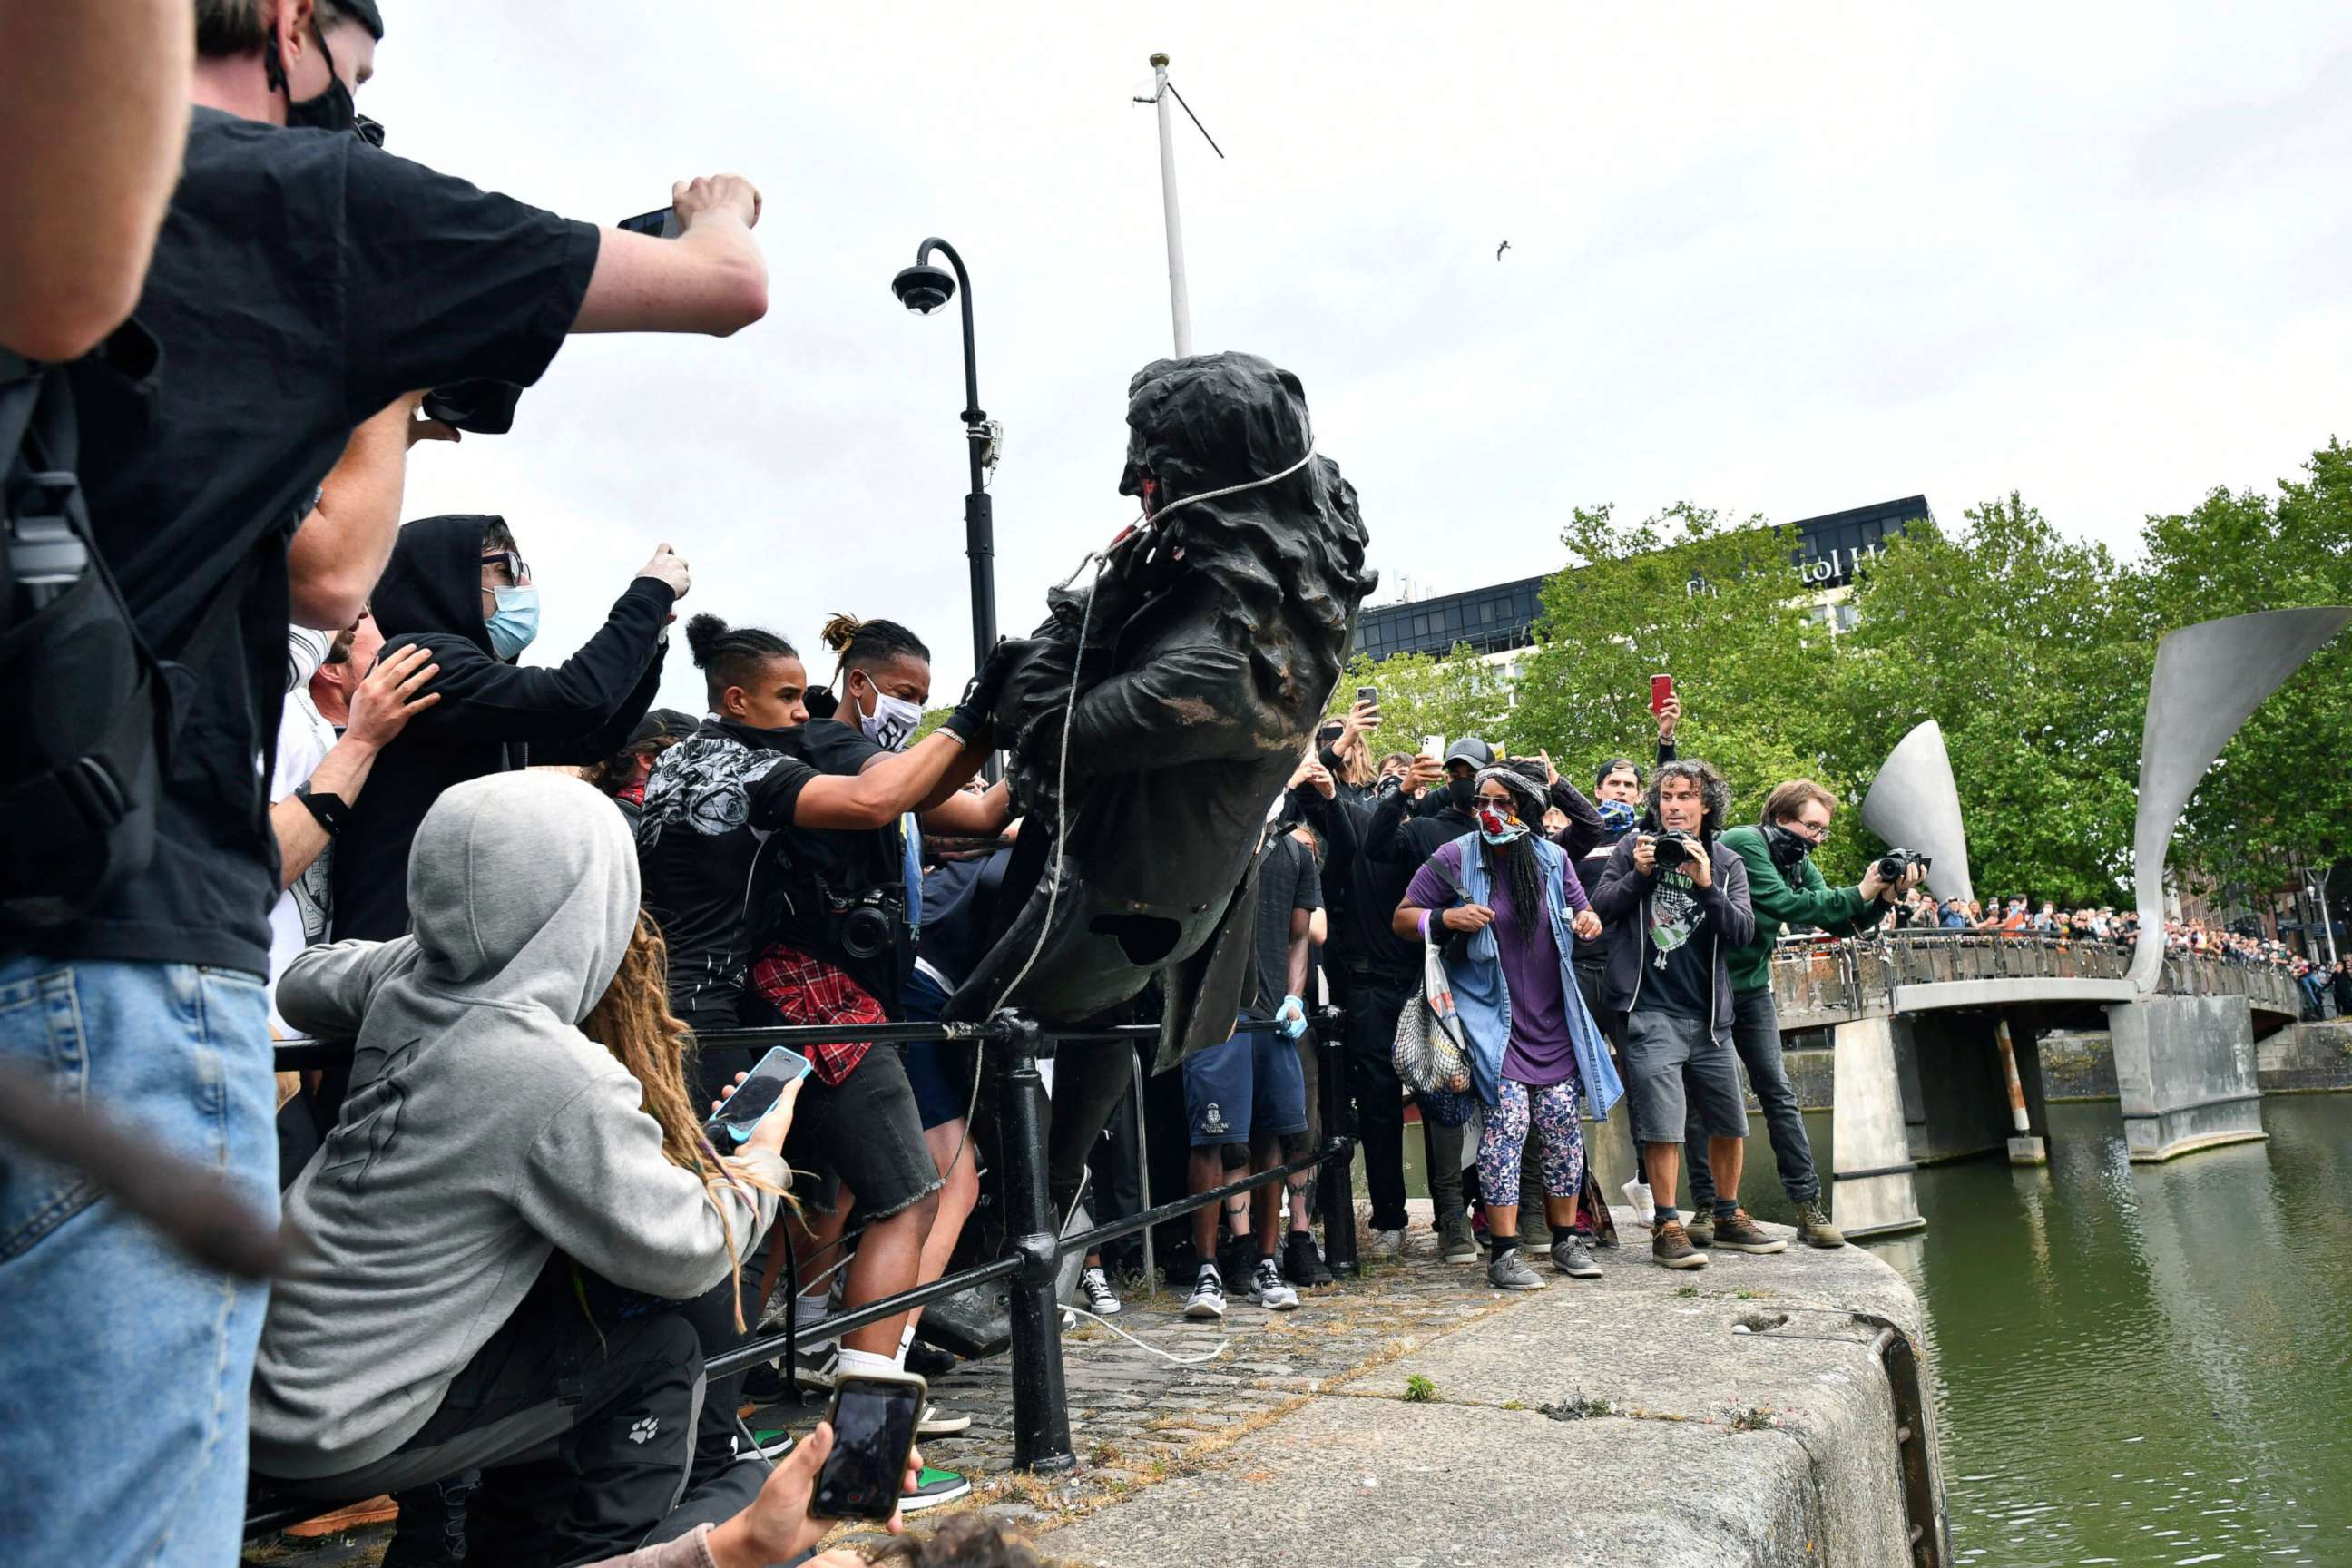 PHOTO: Protesters throw a statue of slave trader Edward Colston into the Bristol harbour, during a Black Lives Matter protest rally, in Bristol, England, June 7, 2020, in response to the recent death of George Floyd.